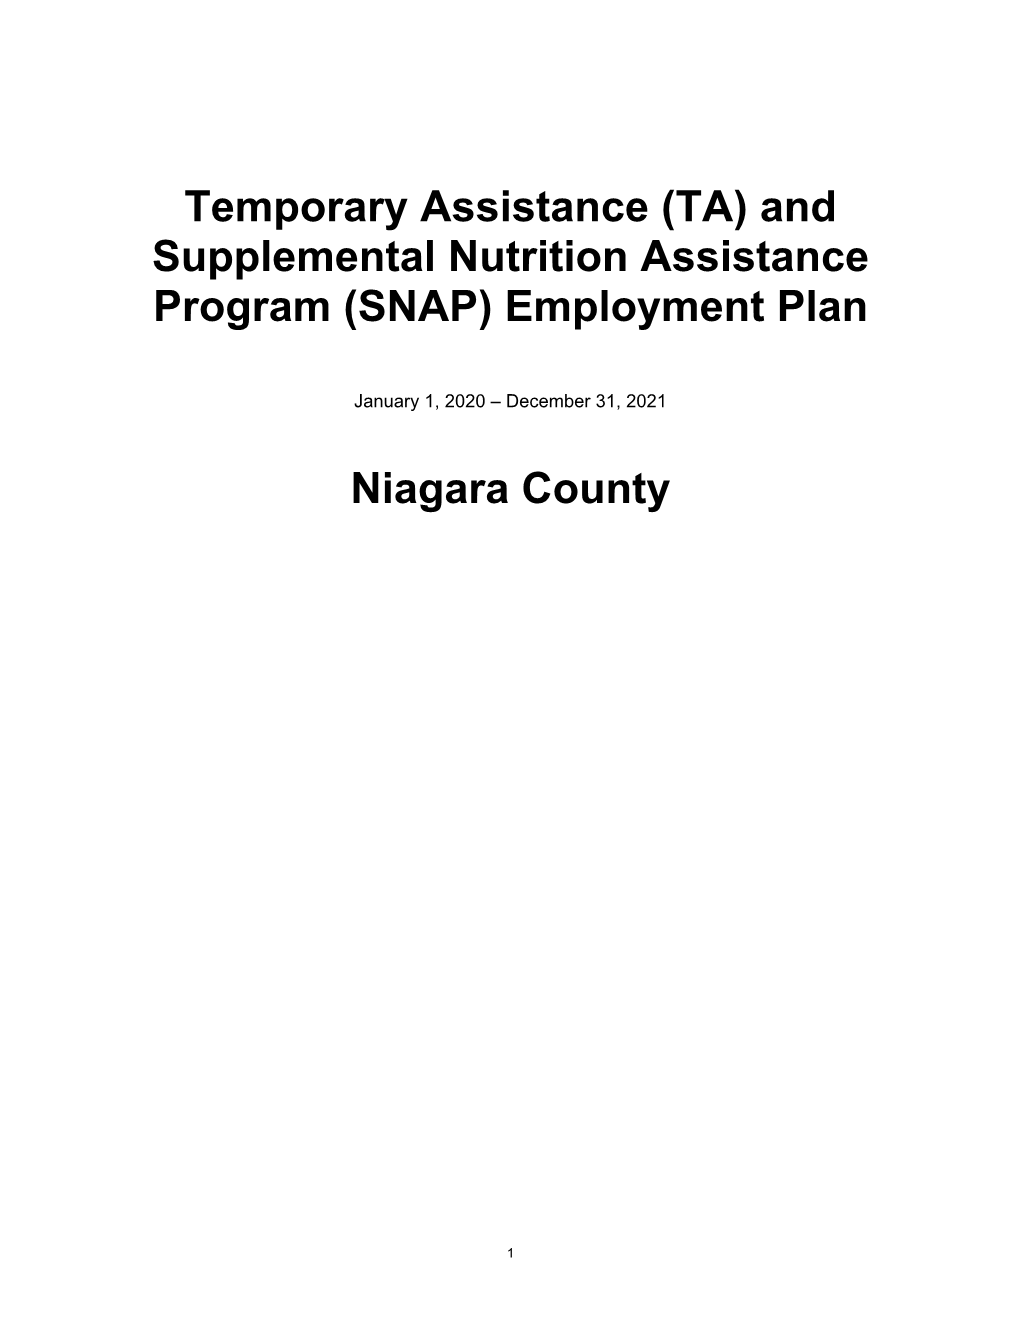 Temporary Assistance (TA) and Supplemental Nutrition Assistance Program (SNAP) Employment Plan